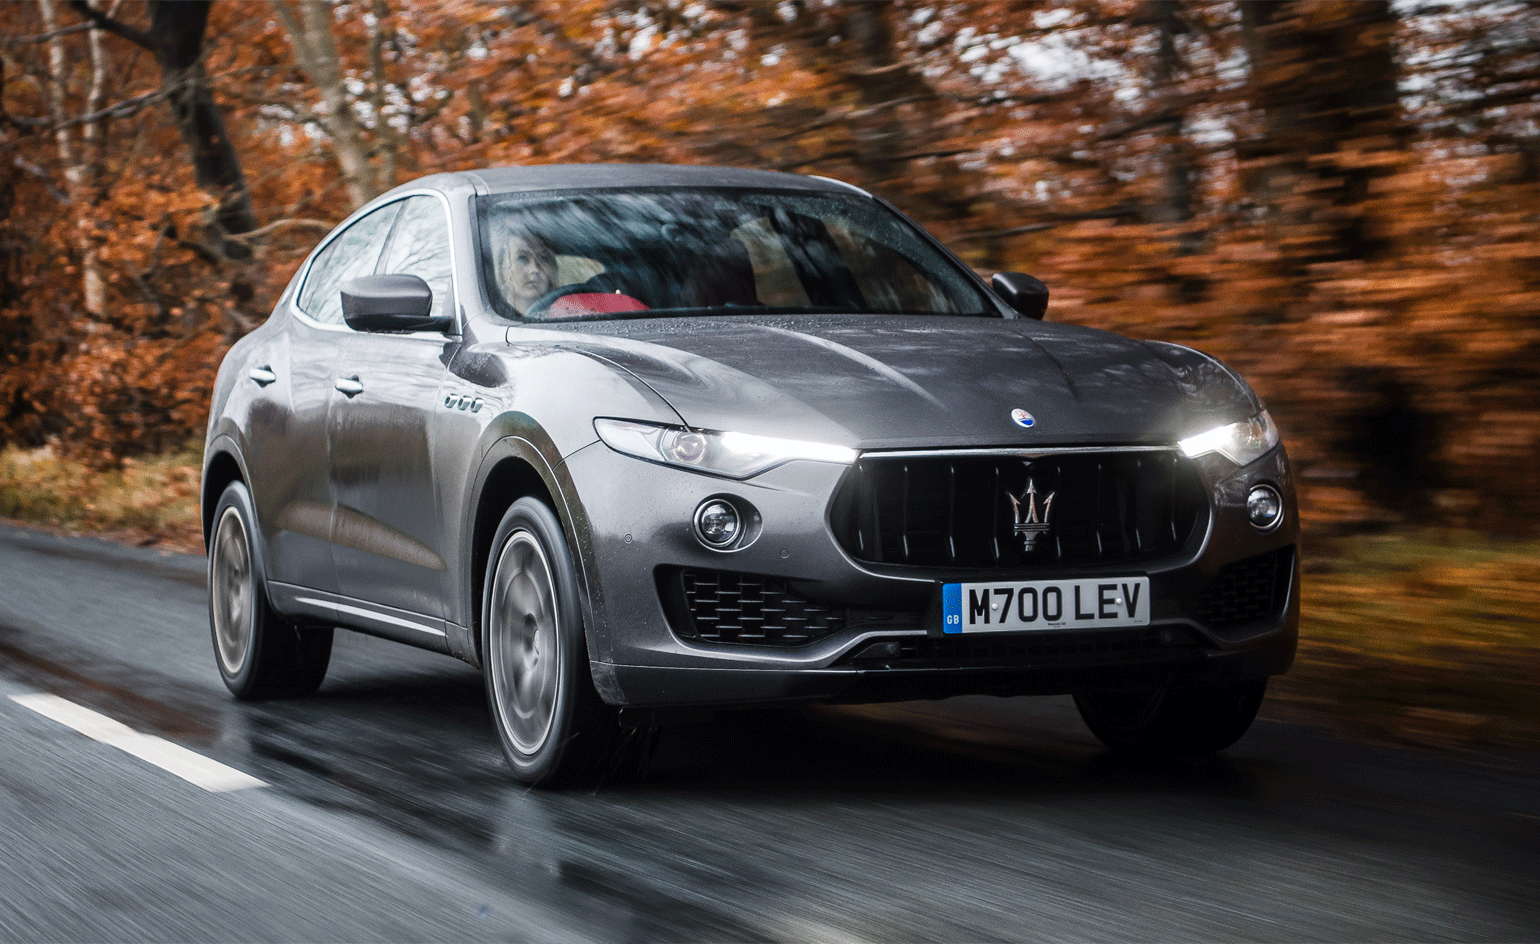 https://cdn.lowgif.com/small/87f25575c712a23c-peugeot-rediscovers-its-design-mojo-with-the-new-5008-peugeot.gif